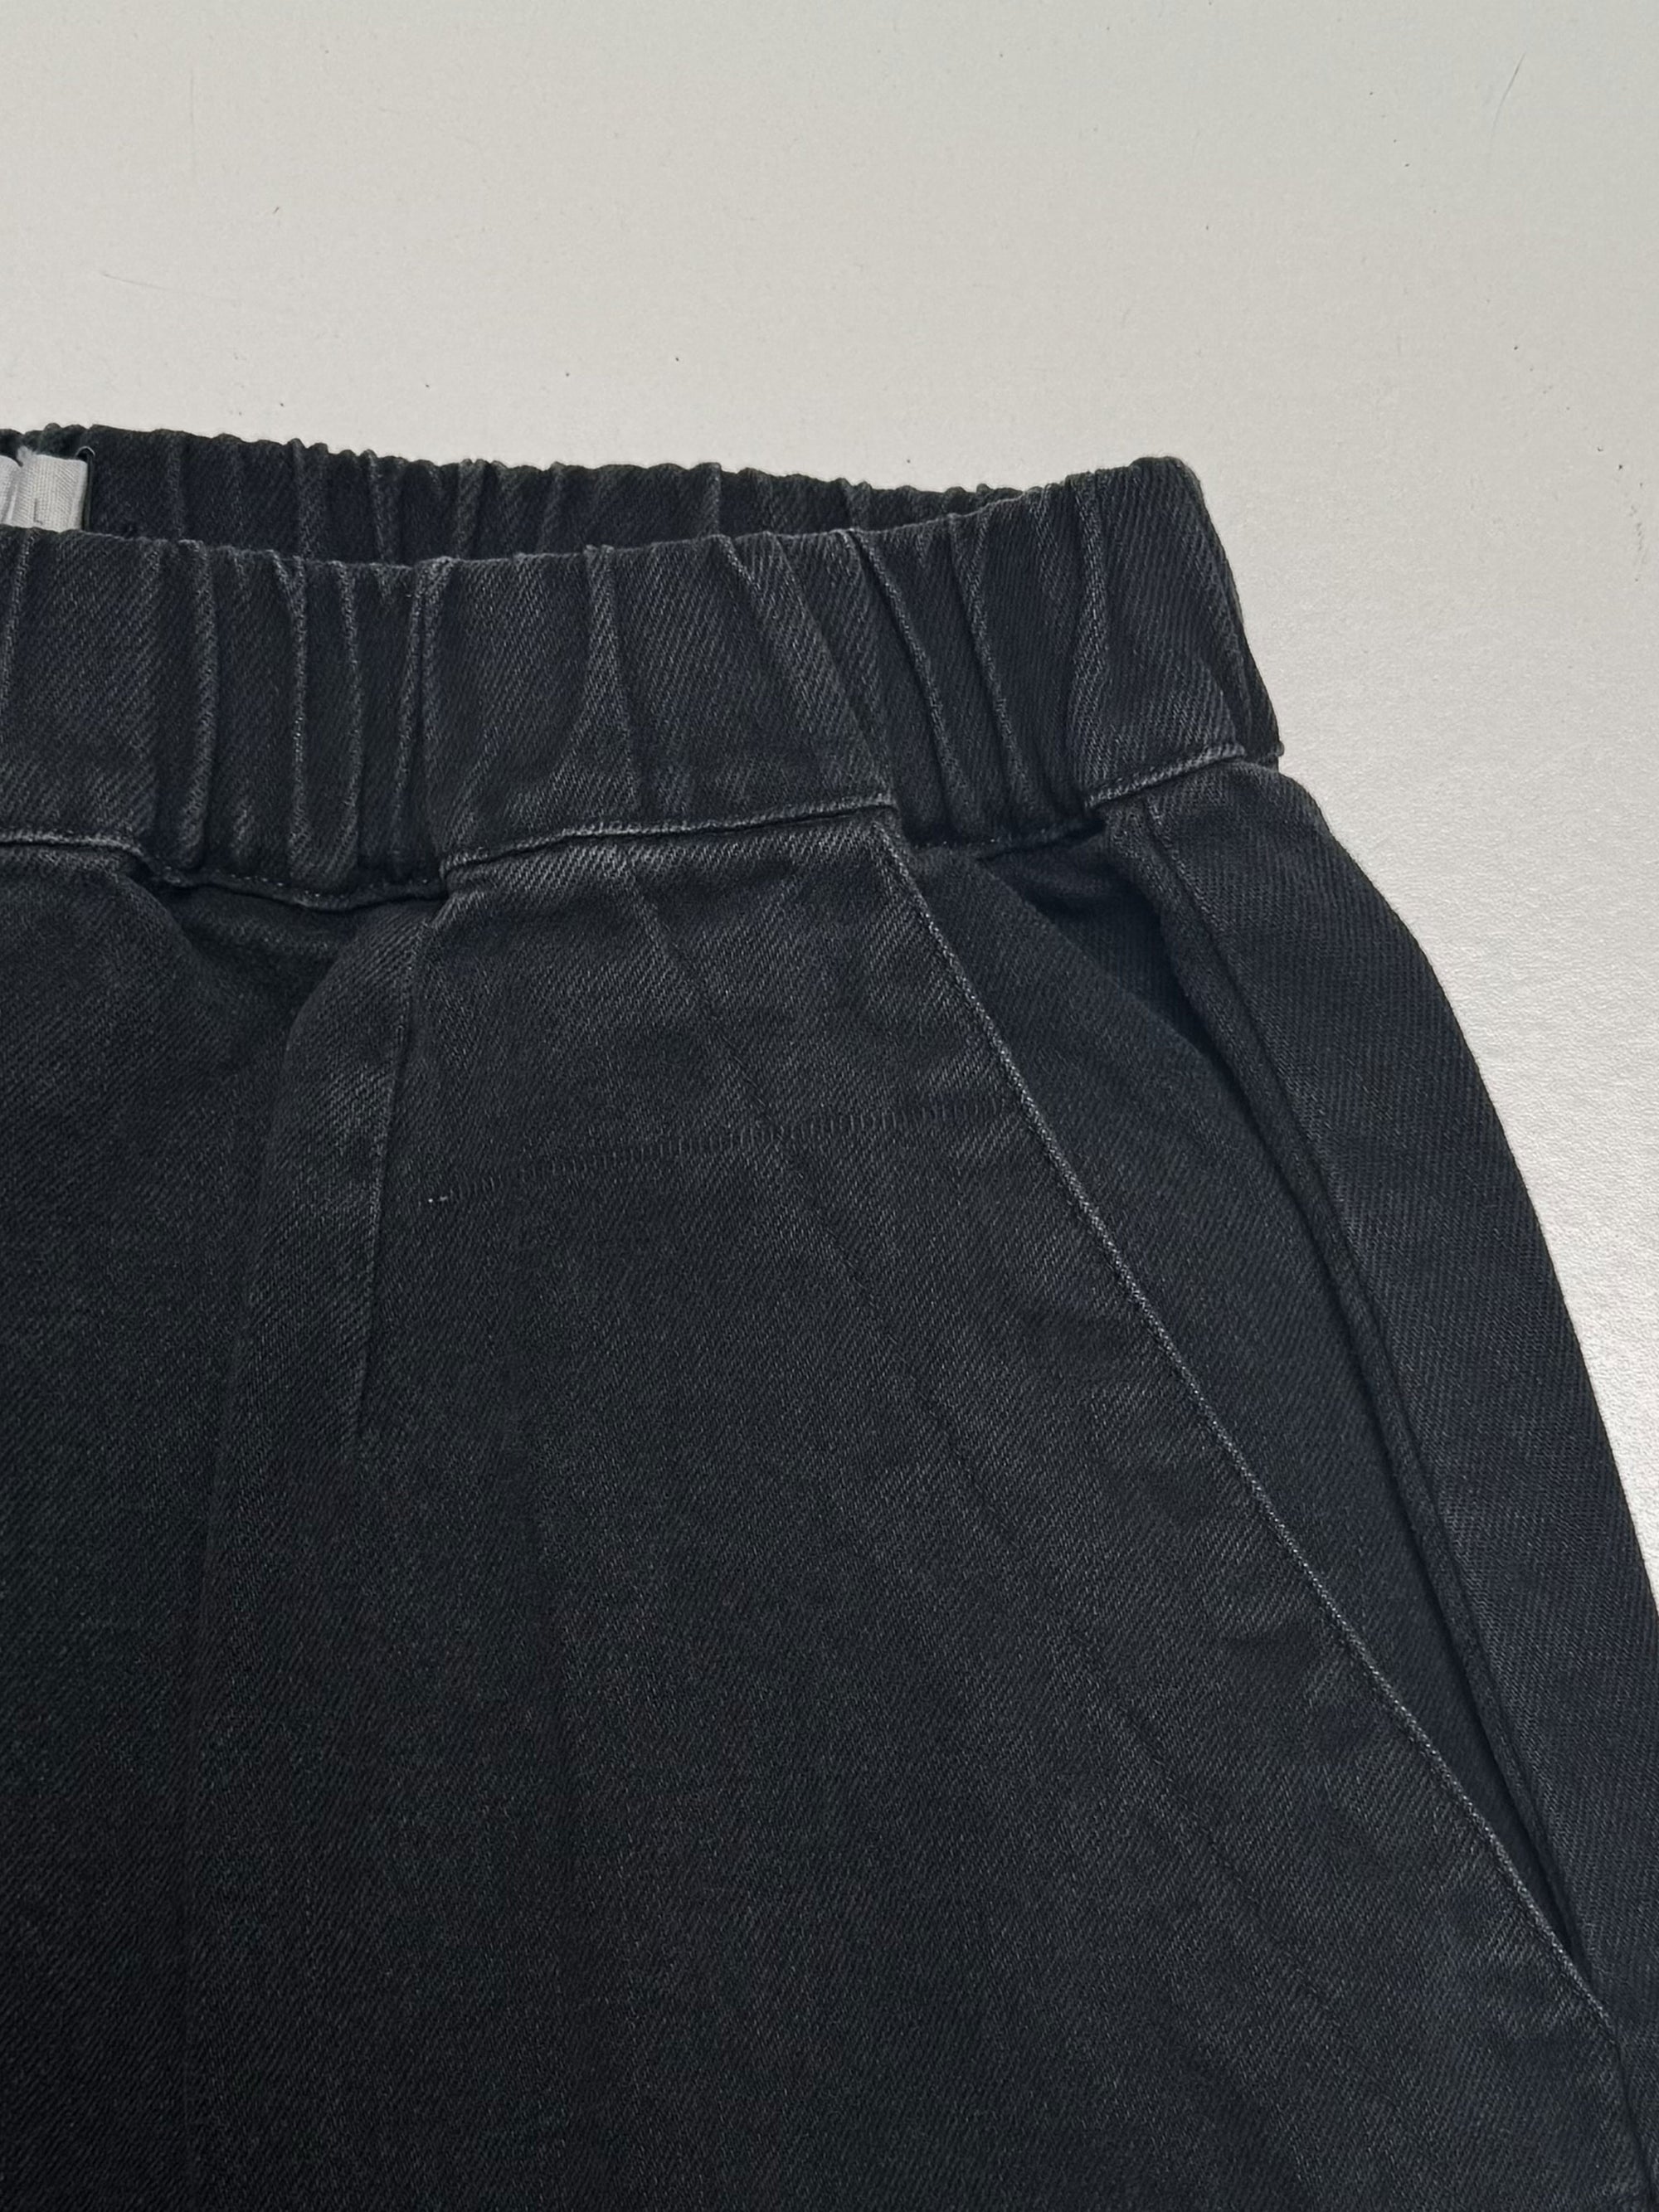 Large Faded Black Barrel Pant - Second Quality